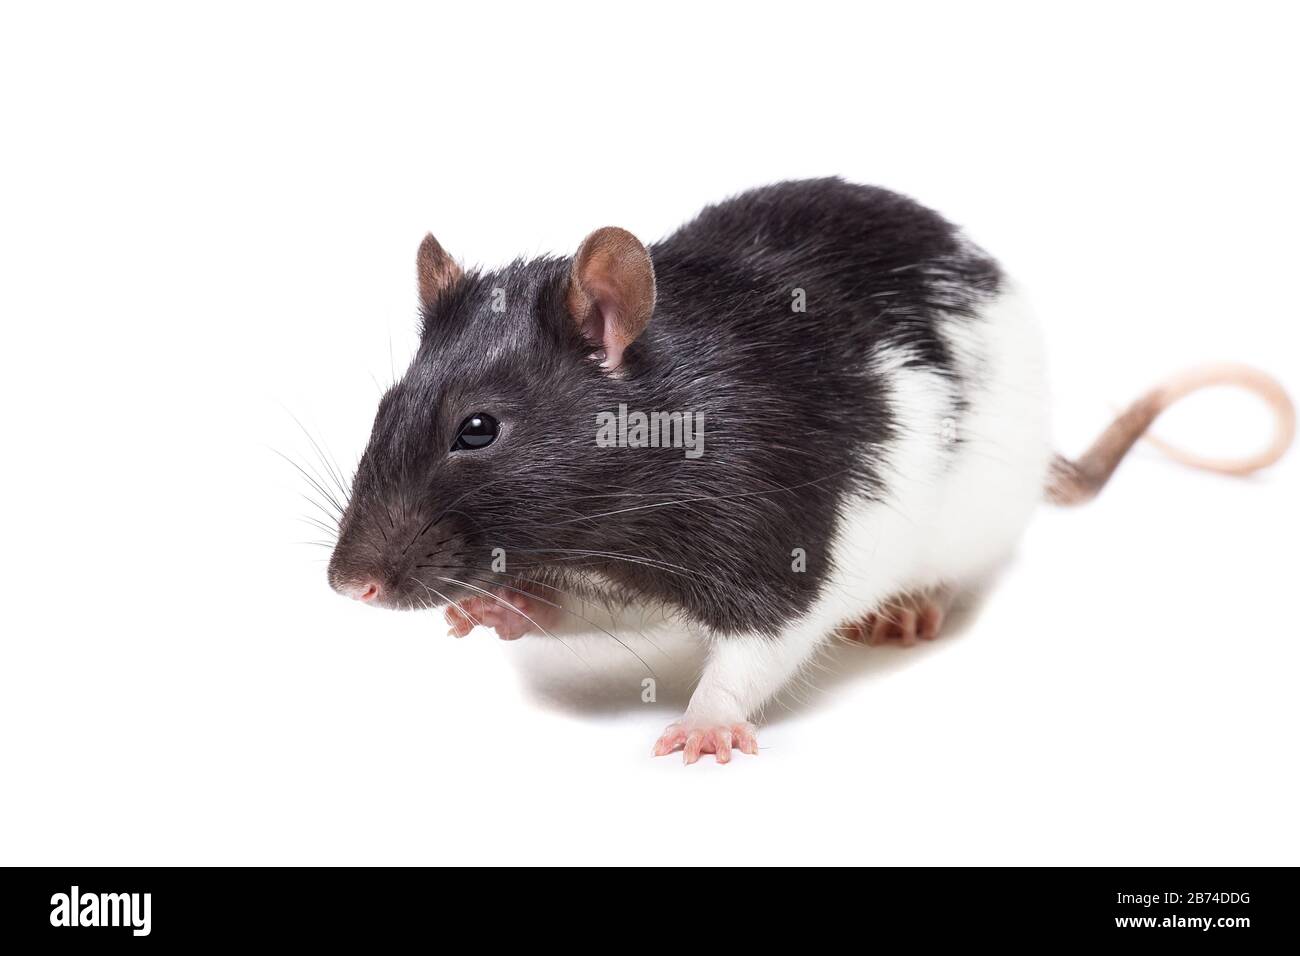 rat close-up isolated on white background, the rat is a symbol of the year 2020 Stock Photo